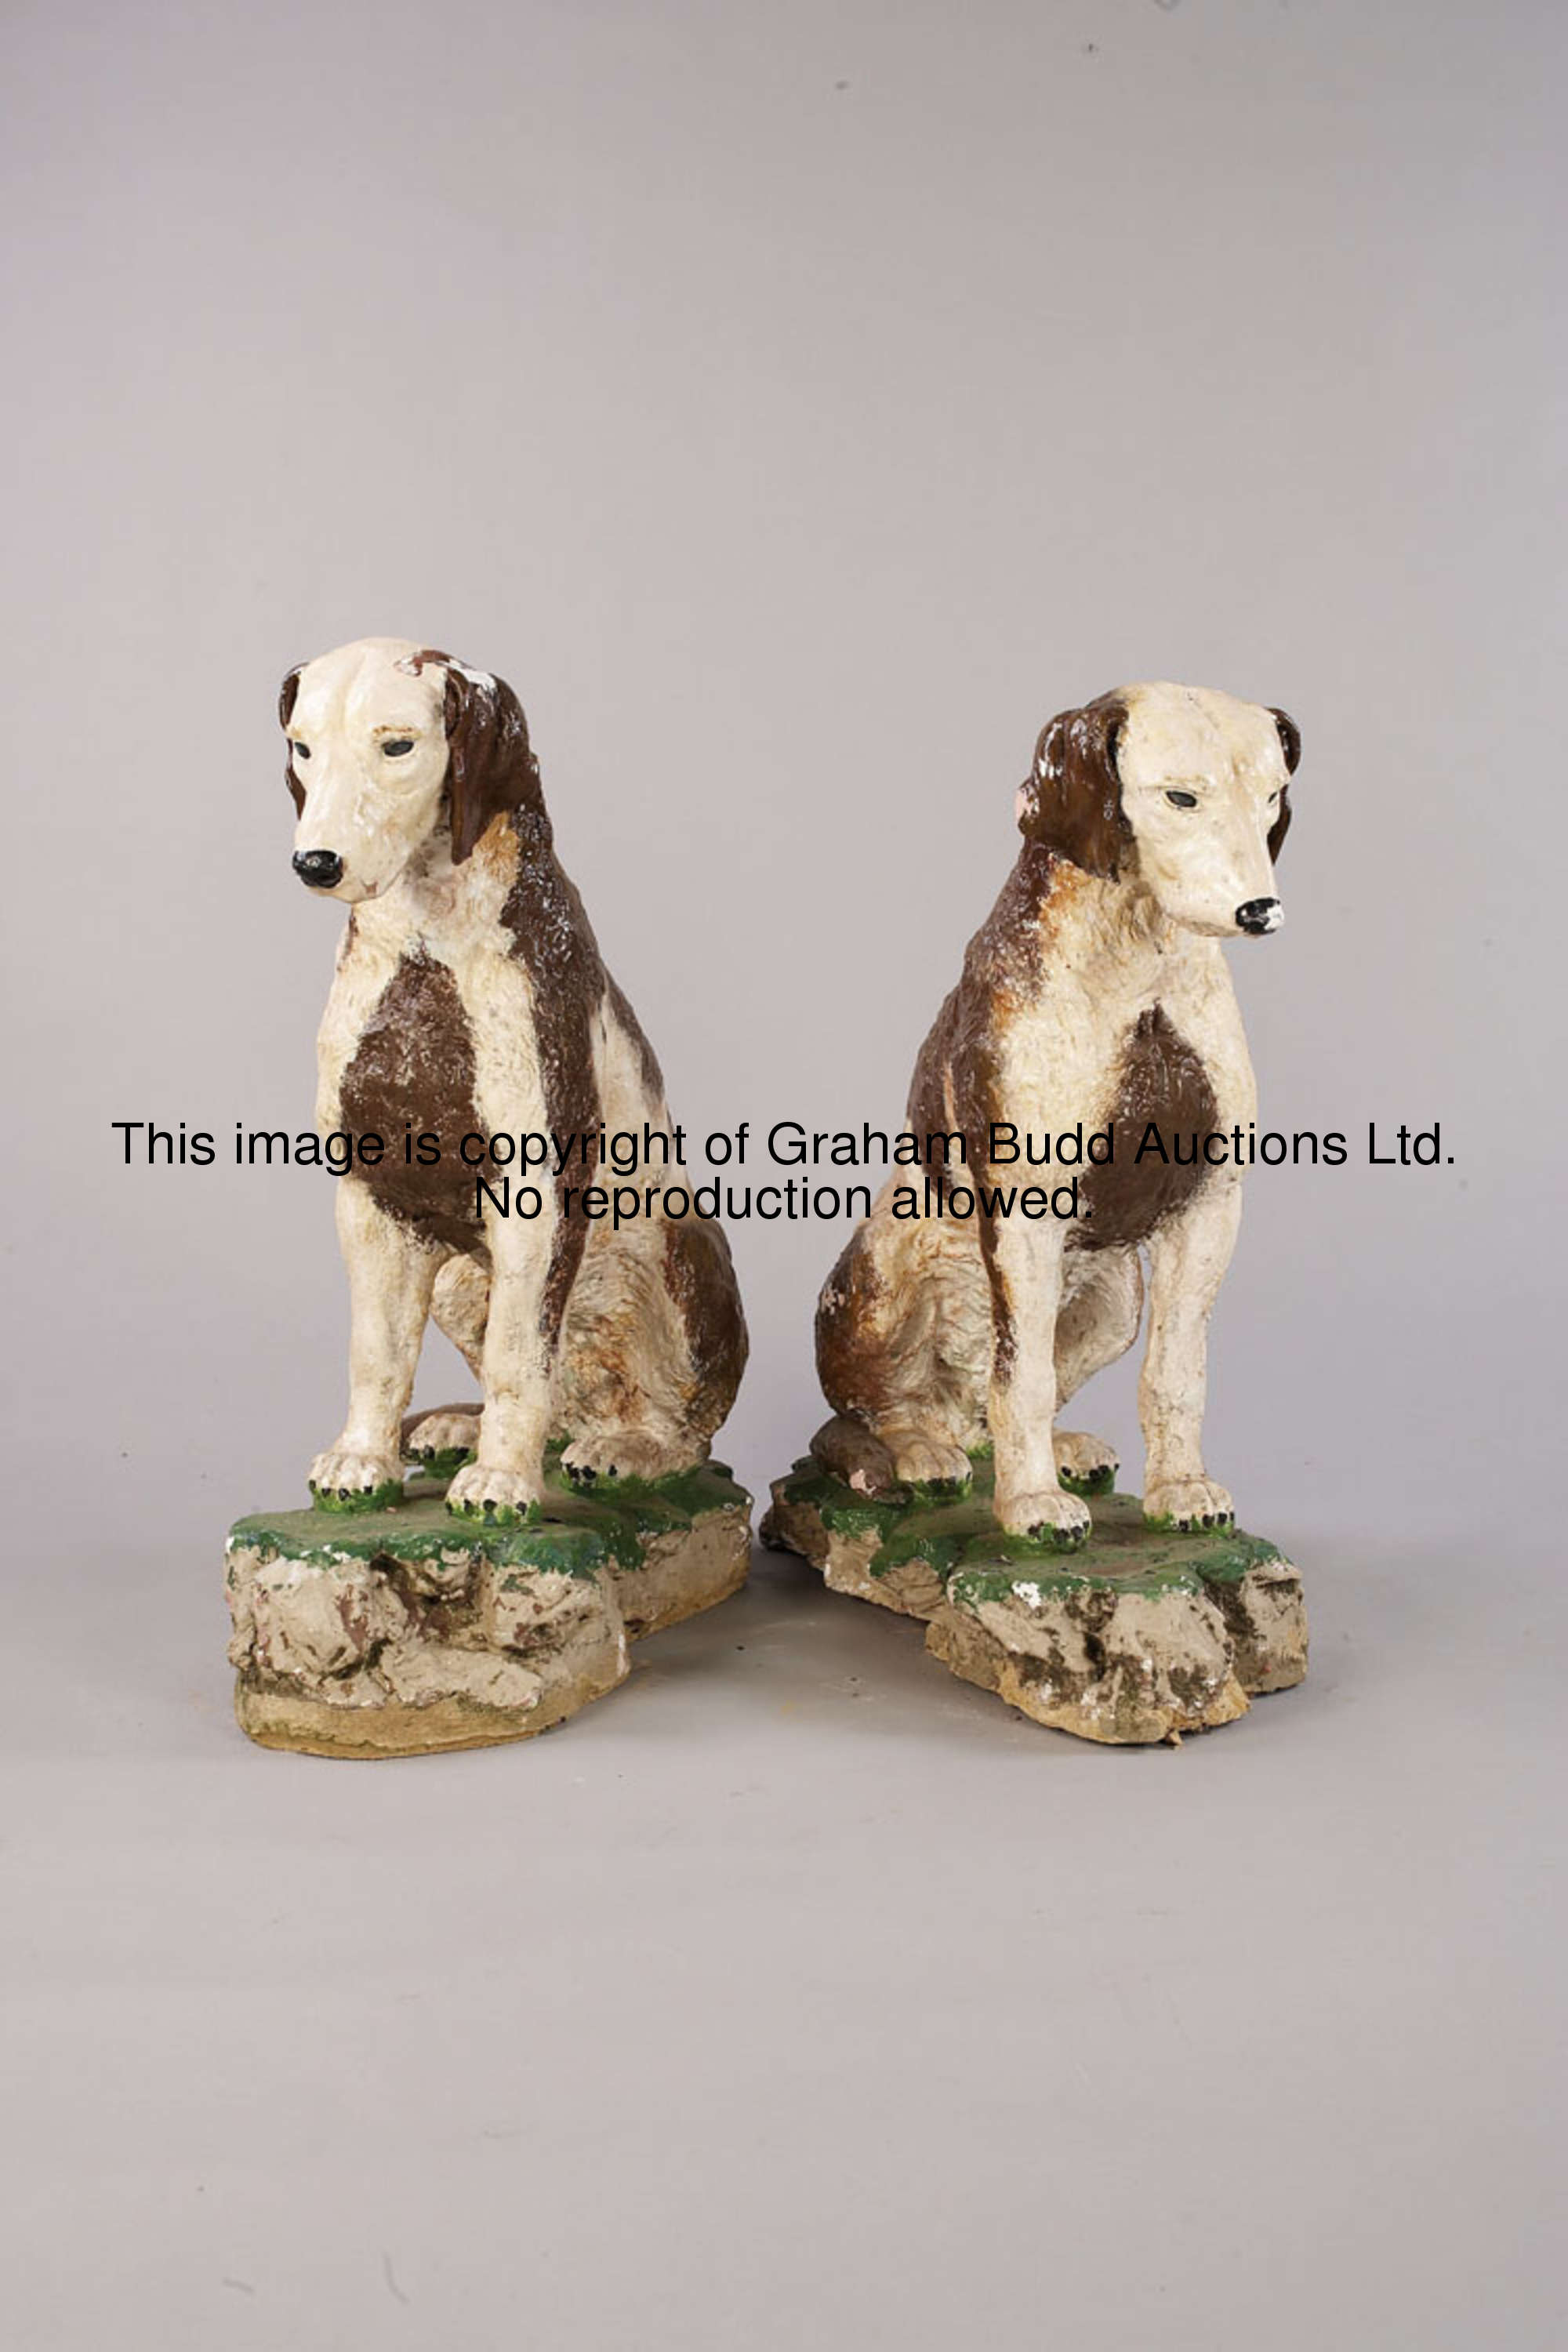 Two models of Buckhounds from the Buckhounds Bar, the large, painted composition hounds set on a nat...